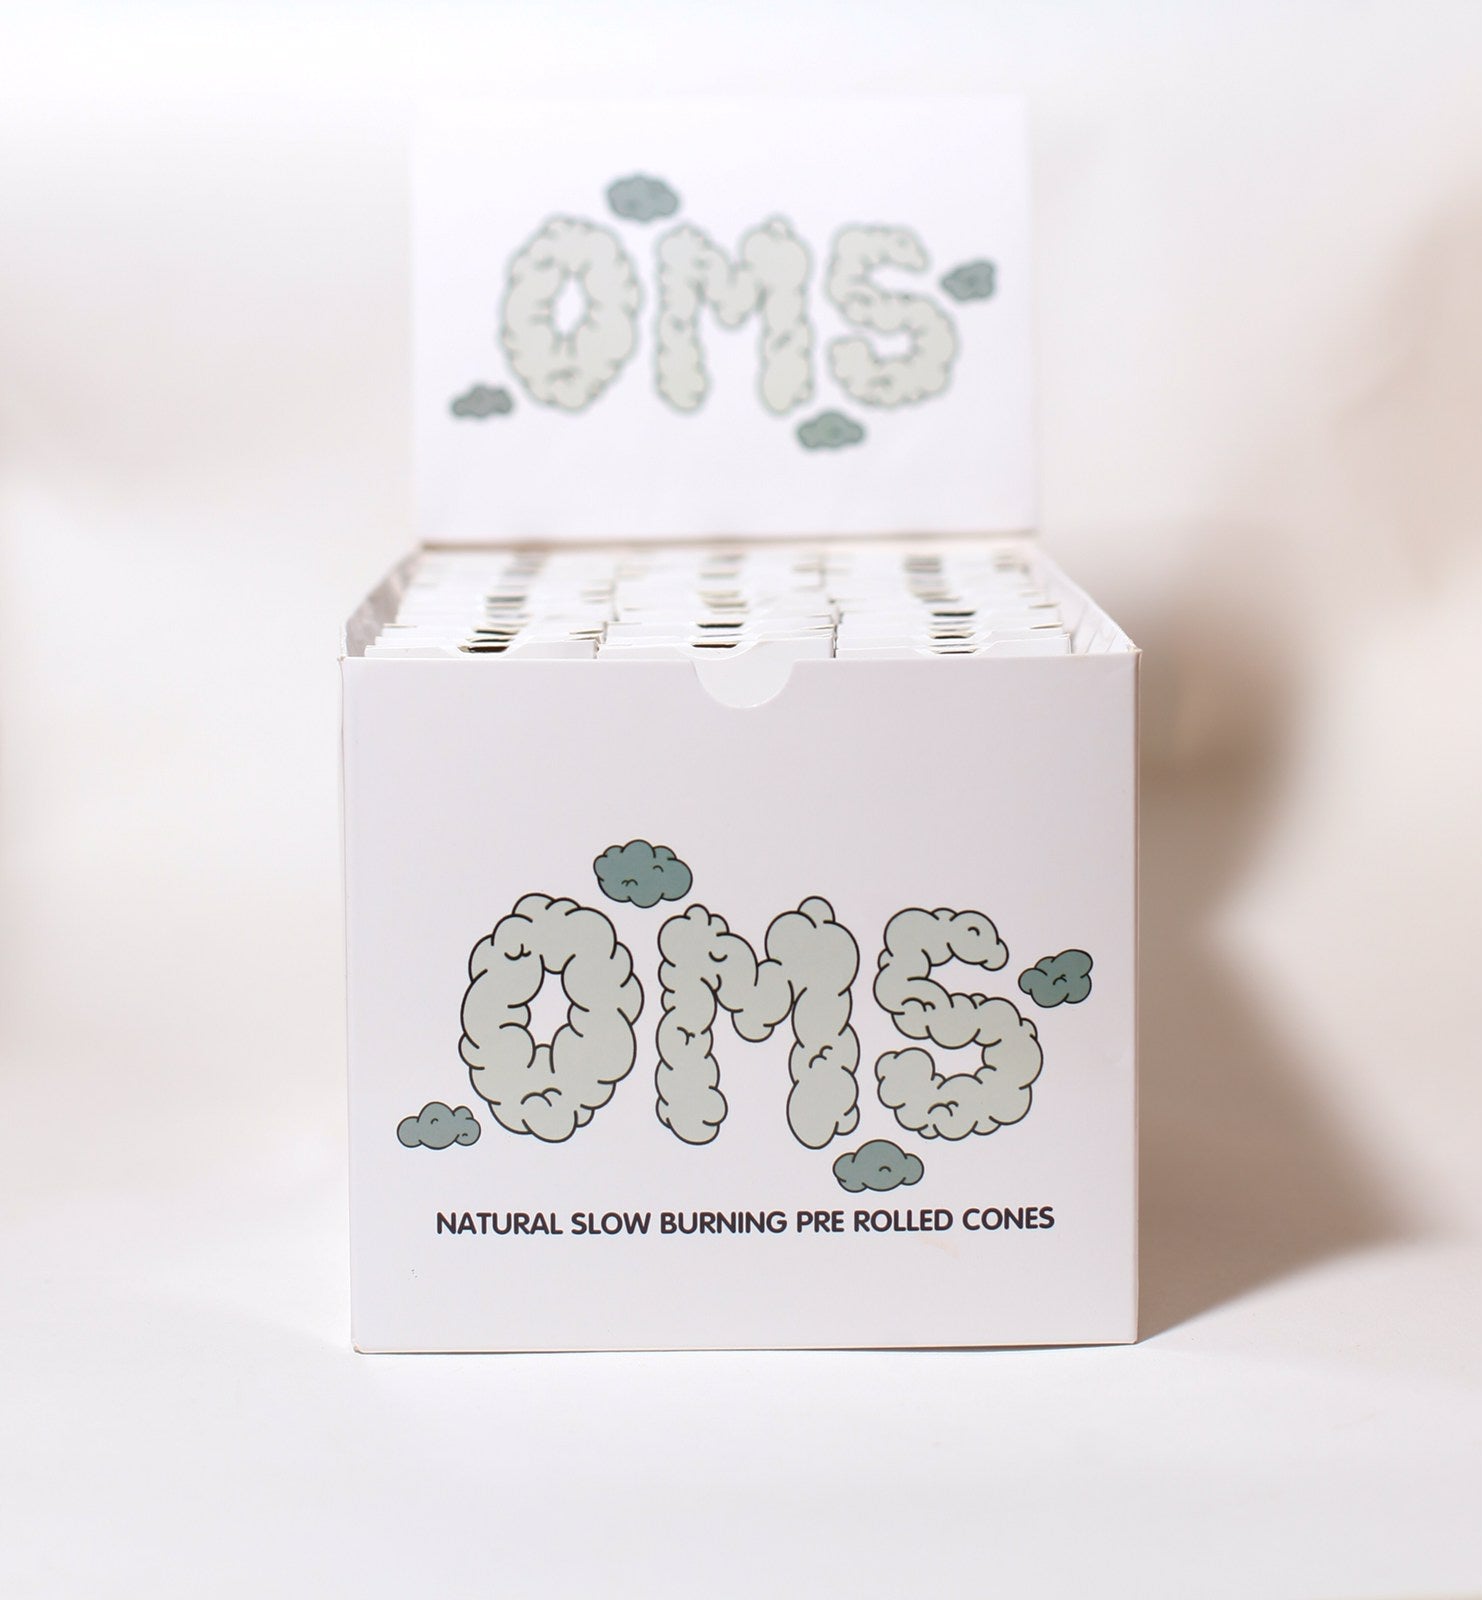 OMS King Size Cones (box)